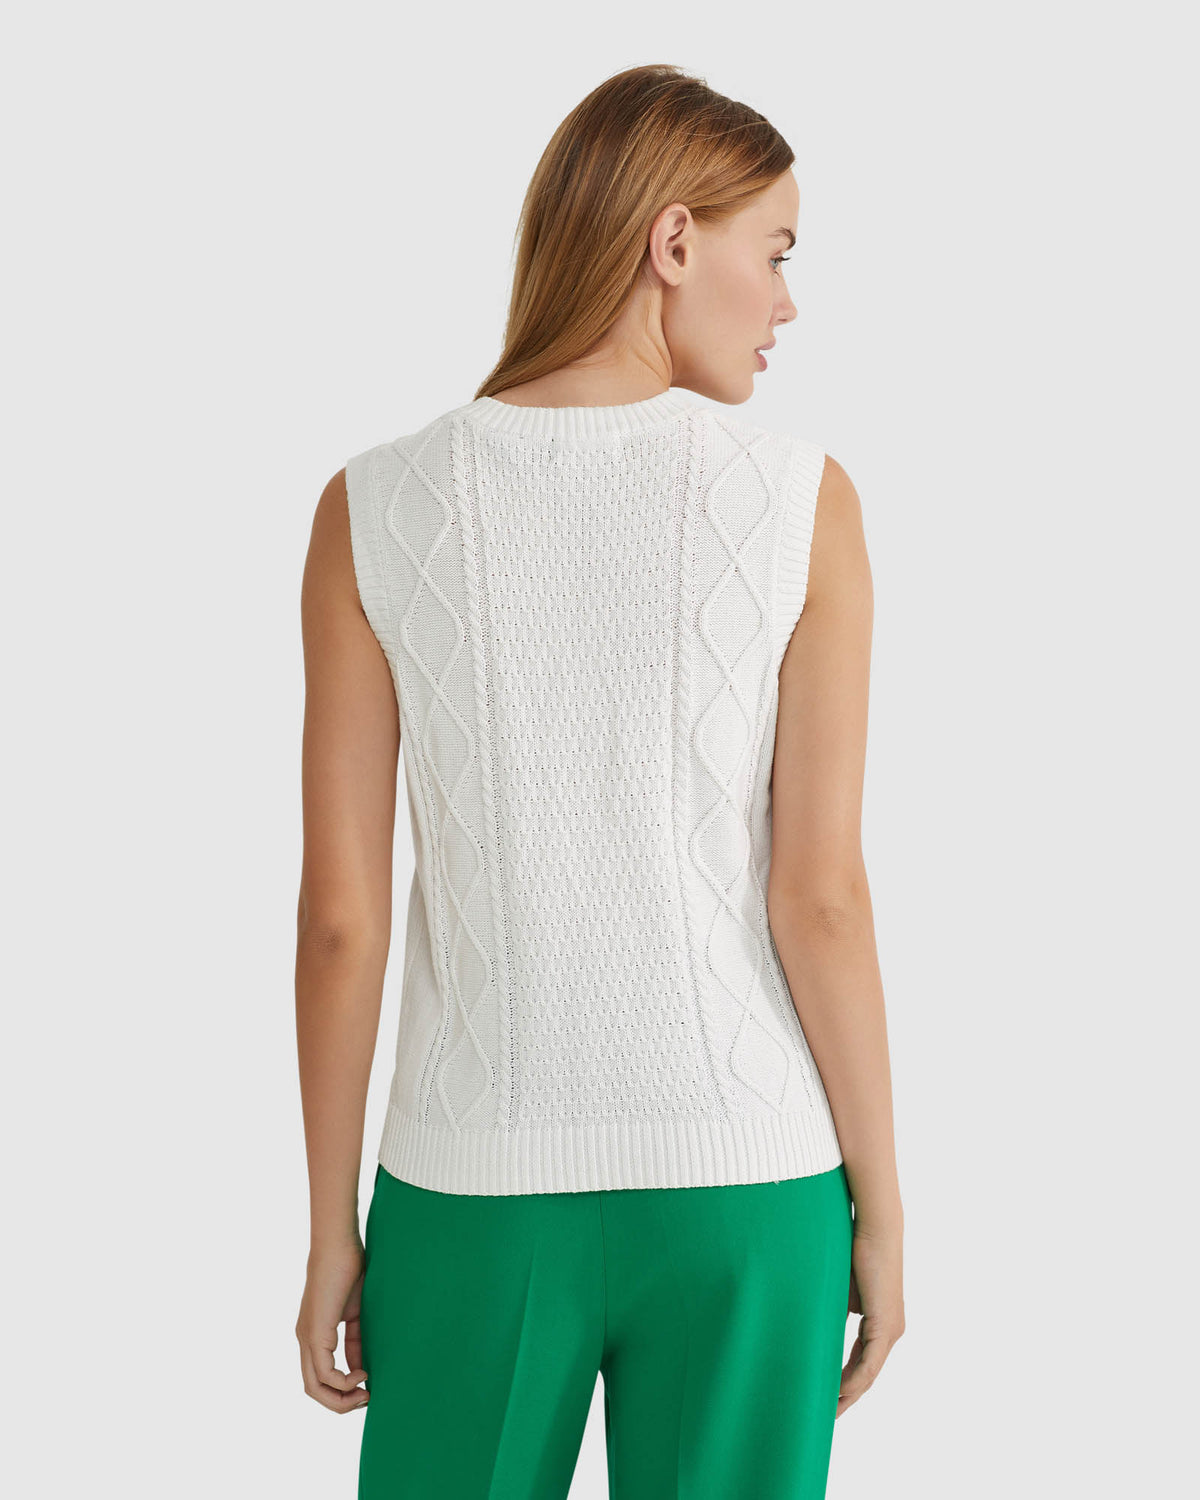 POPPY COTTON CABLE VEST WOMENS KNITWEAR